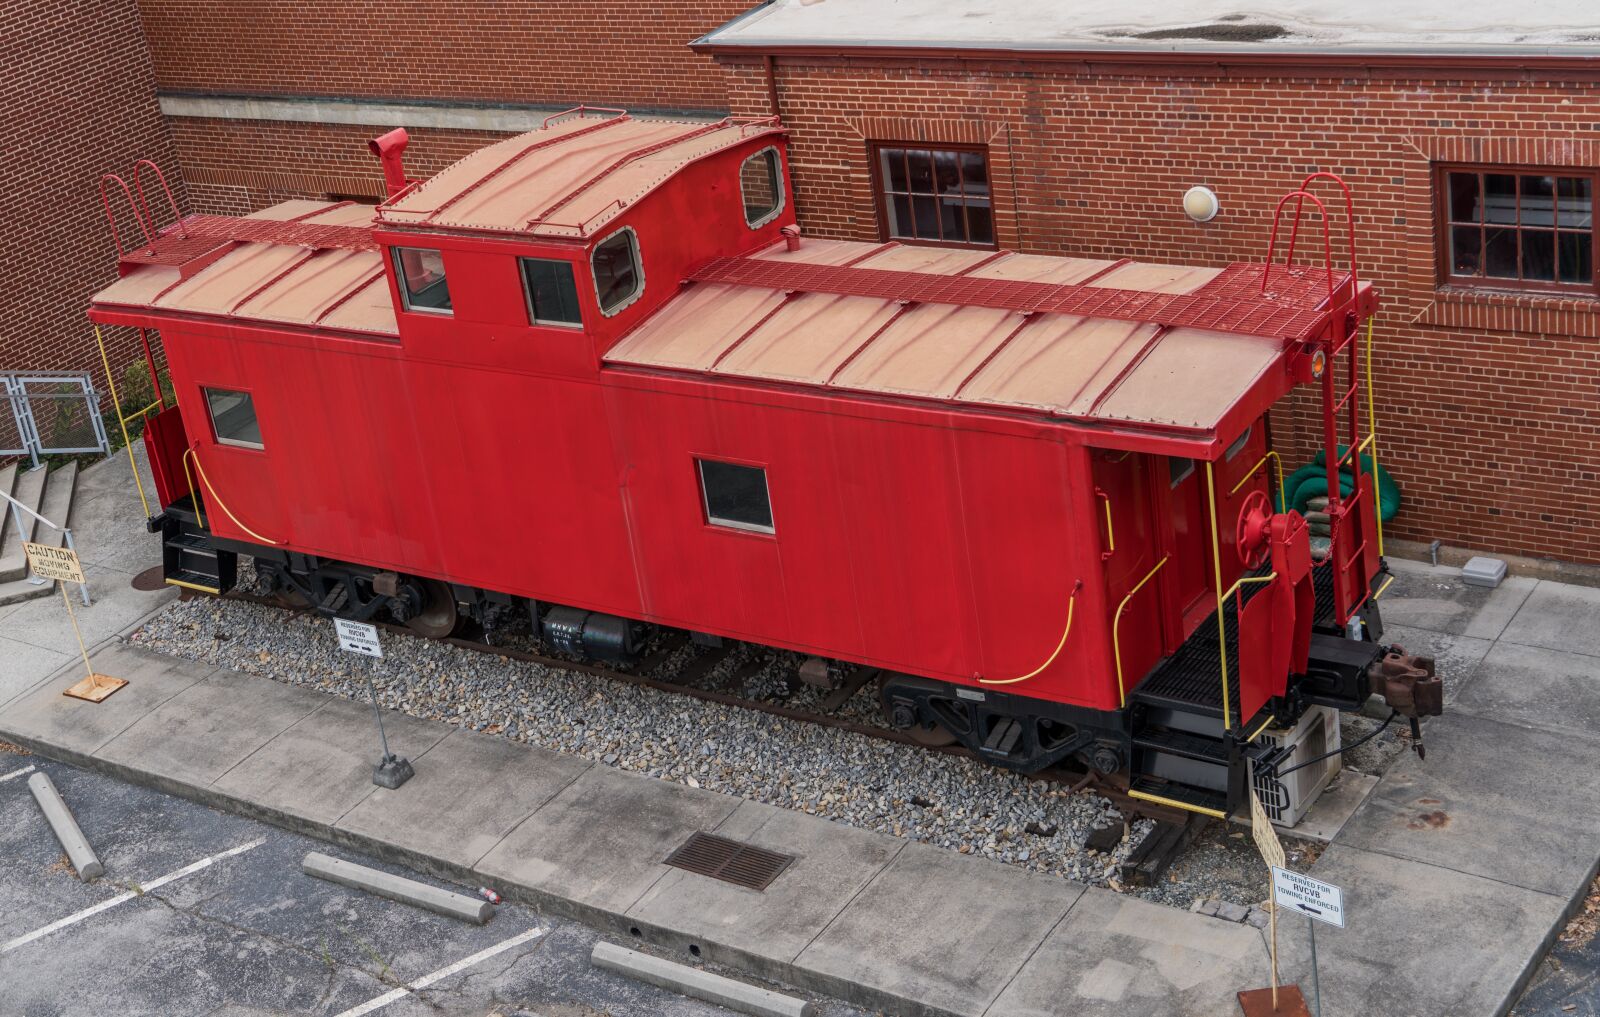 Sony a7R II sample photo. Caboose, red, train photography